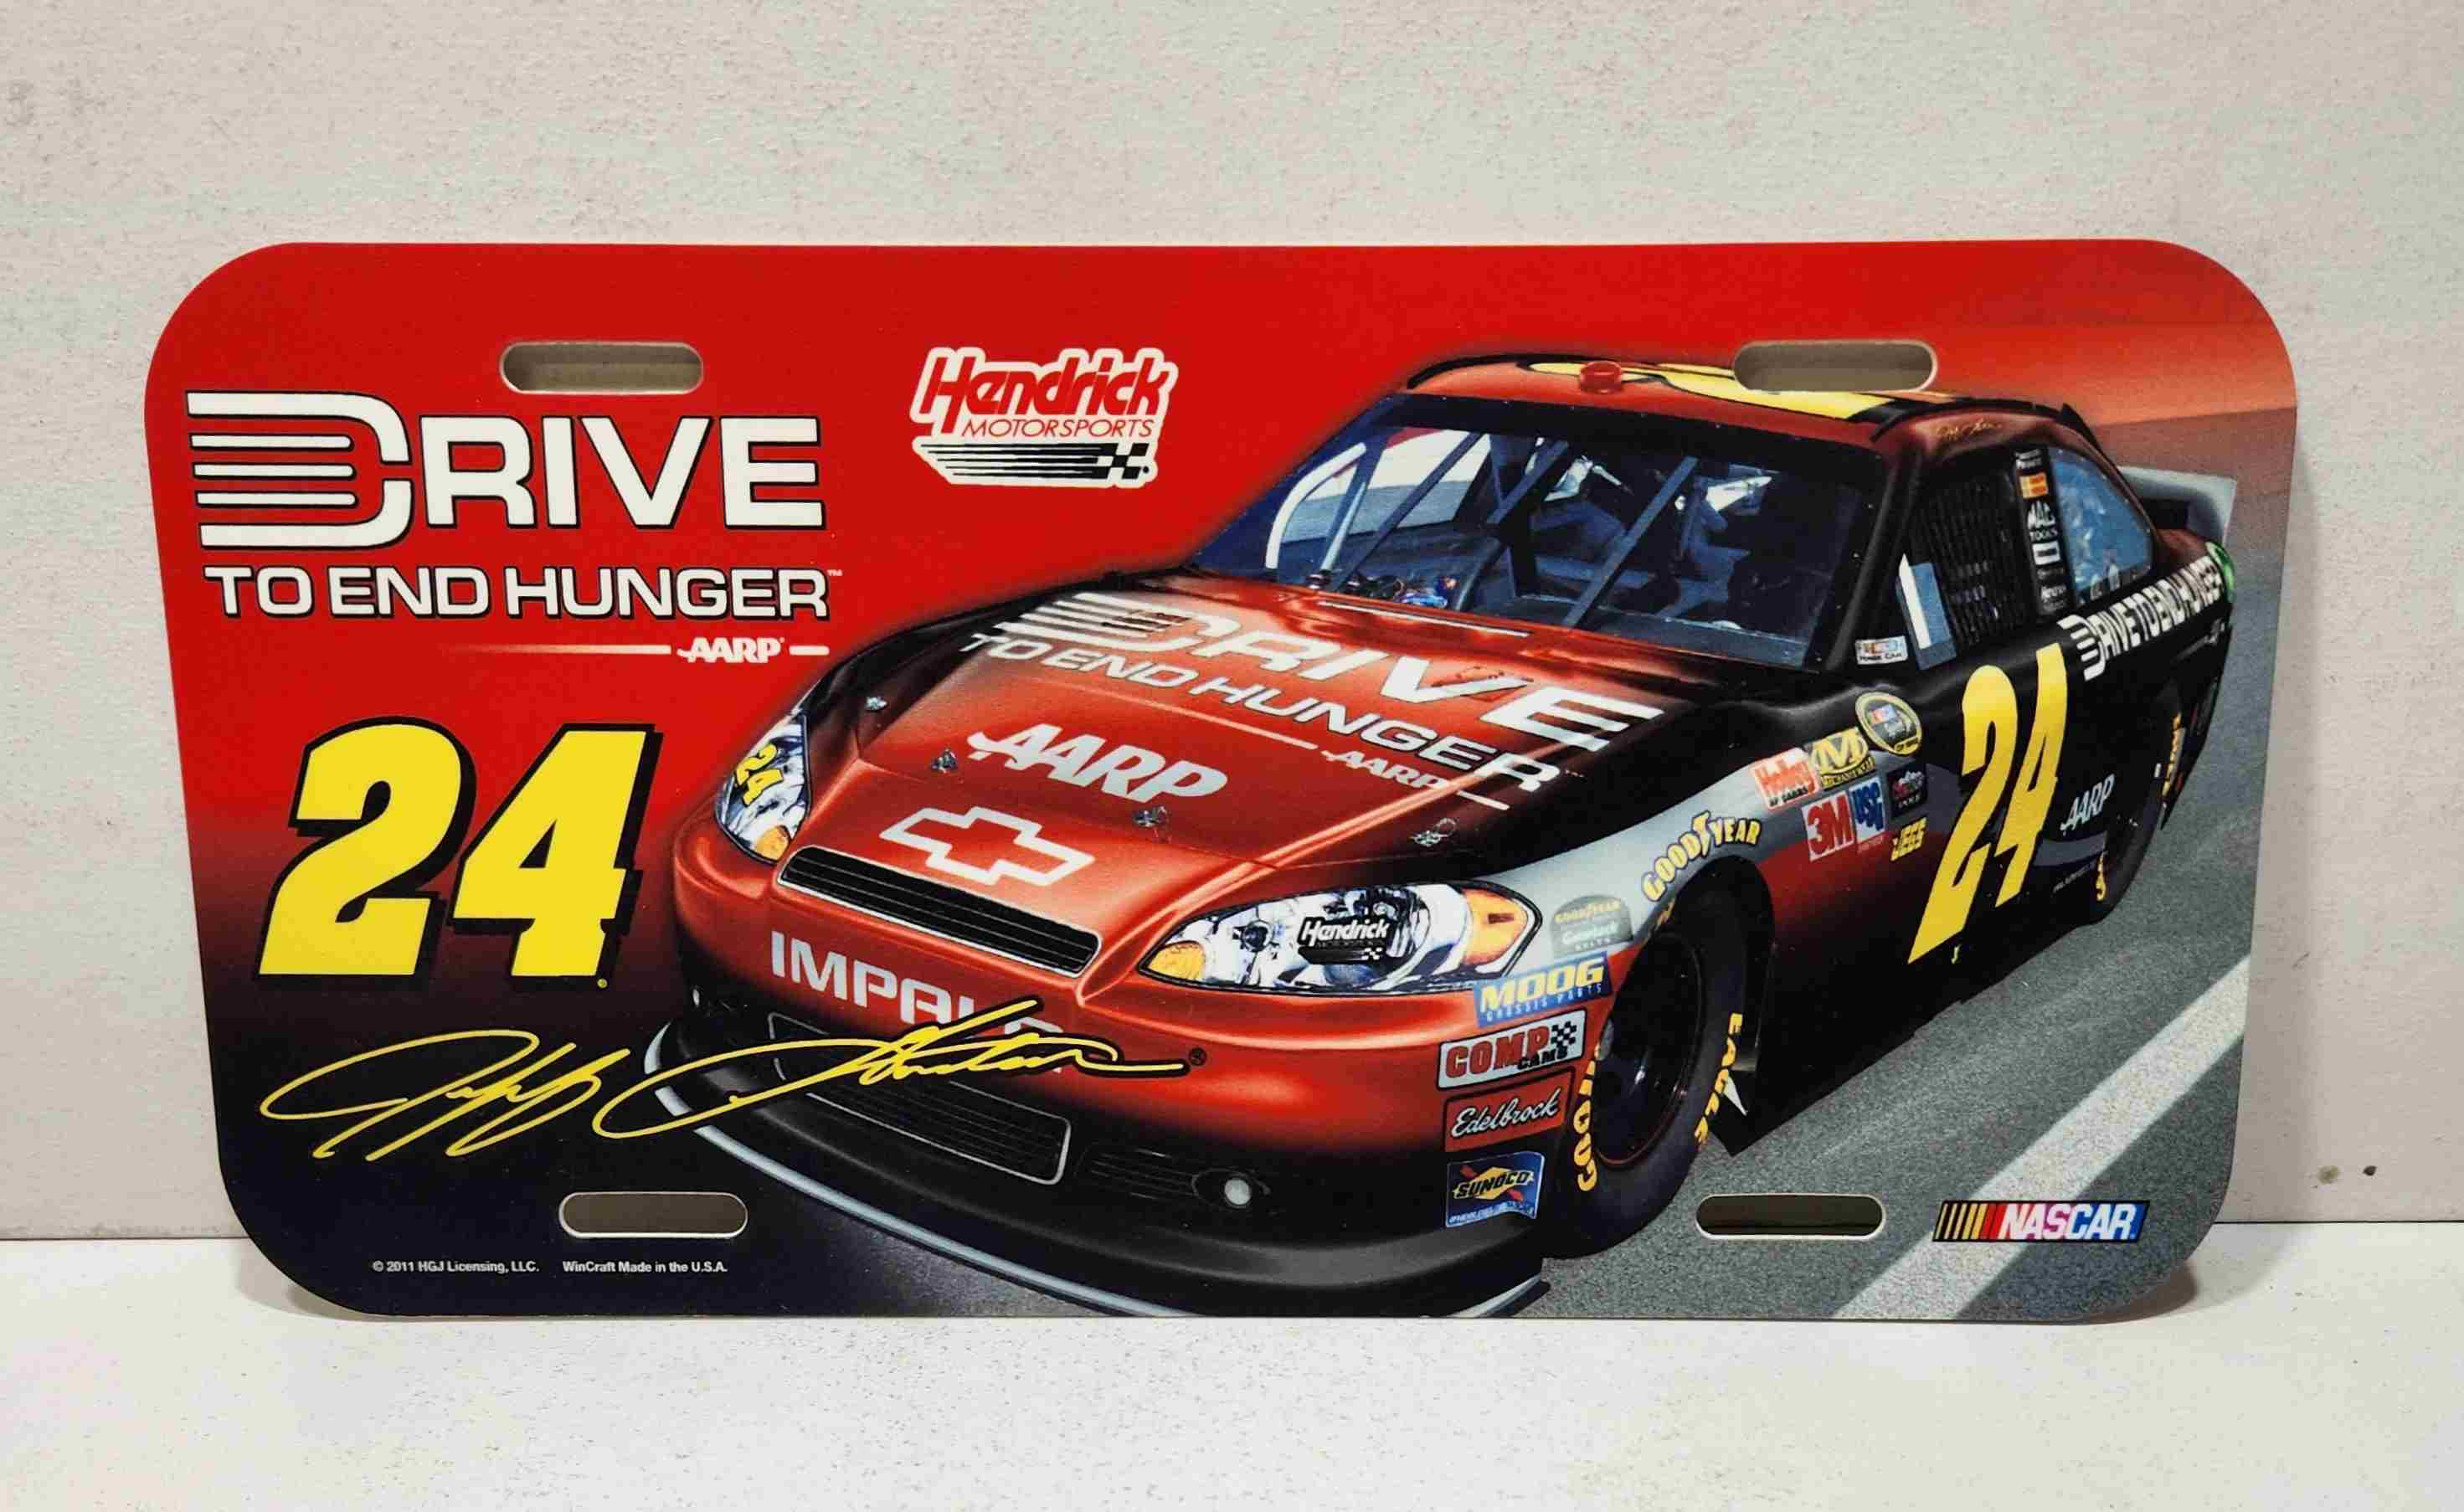 2011 Jeff Gordon AARP "Drive To End Hunger" plastic license plate by Wincraft